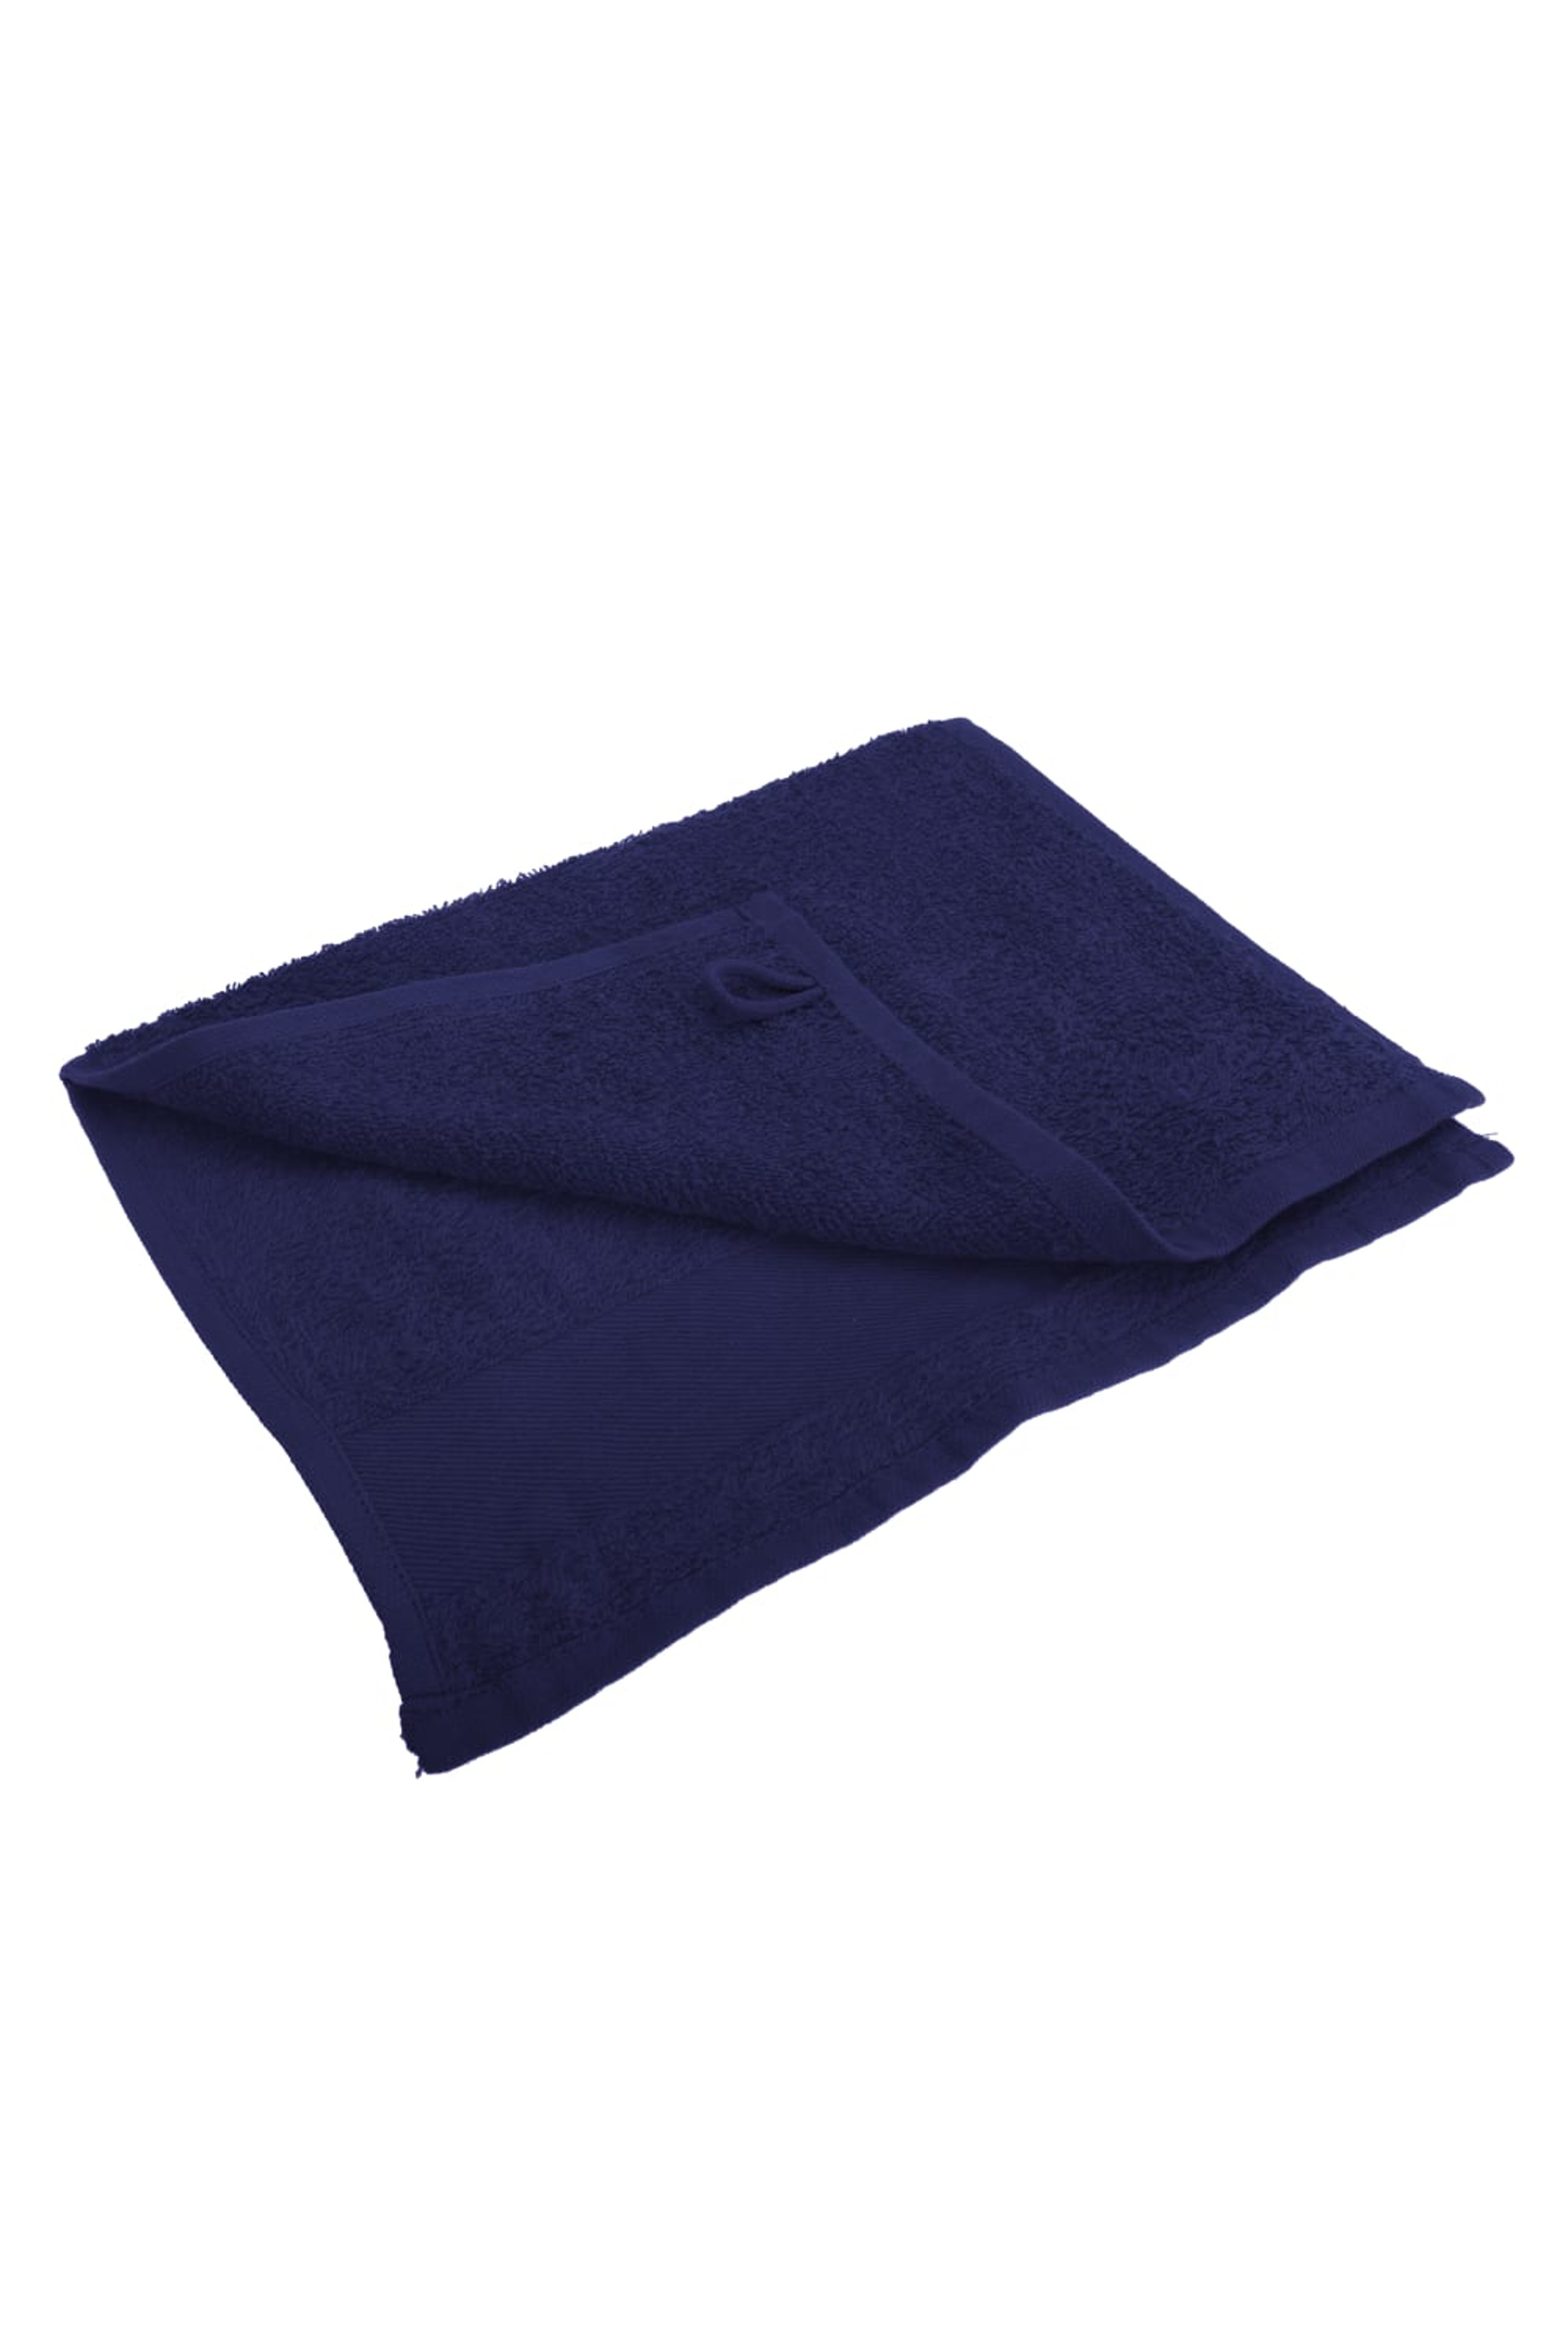 SOLS SOLS SOLS ISLAND GUEST TOWEL (11 X 20 INCHES) (FRENCH NAVY) (ONE)